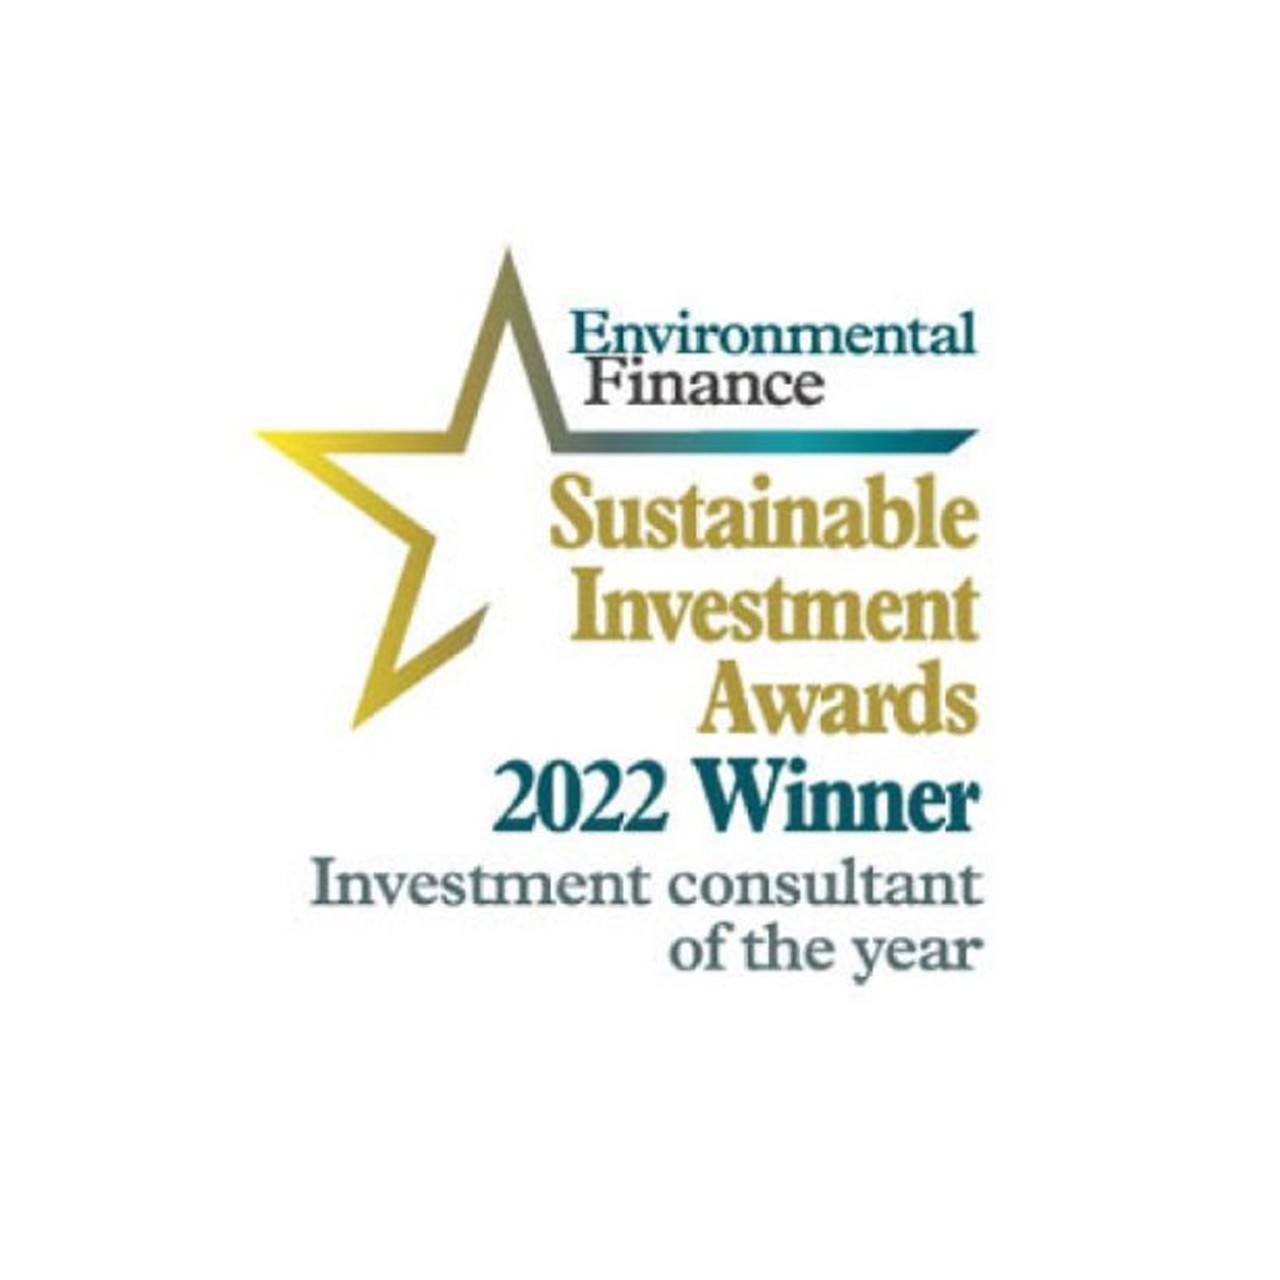 Sustainable Investment Awards 2022